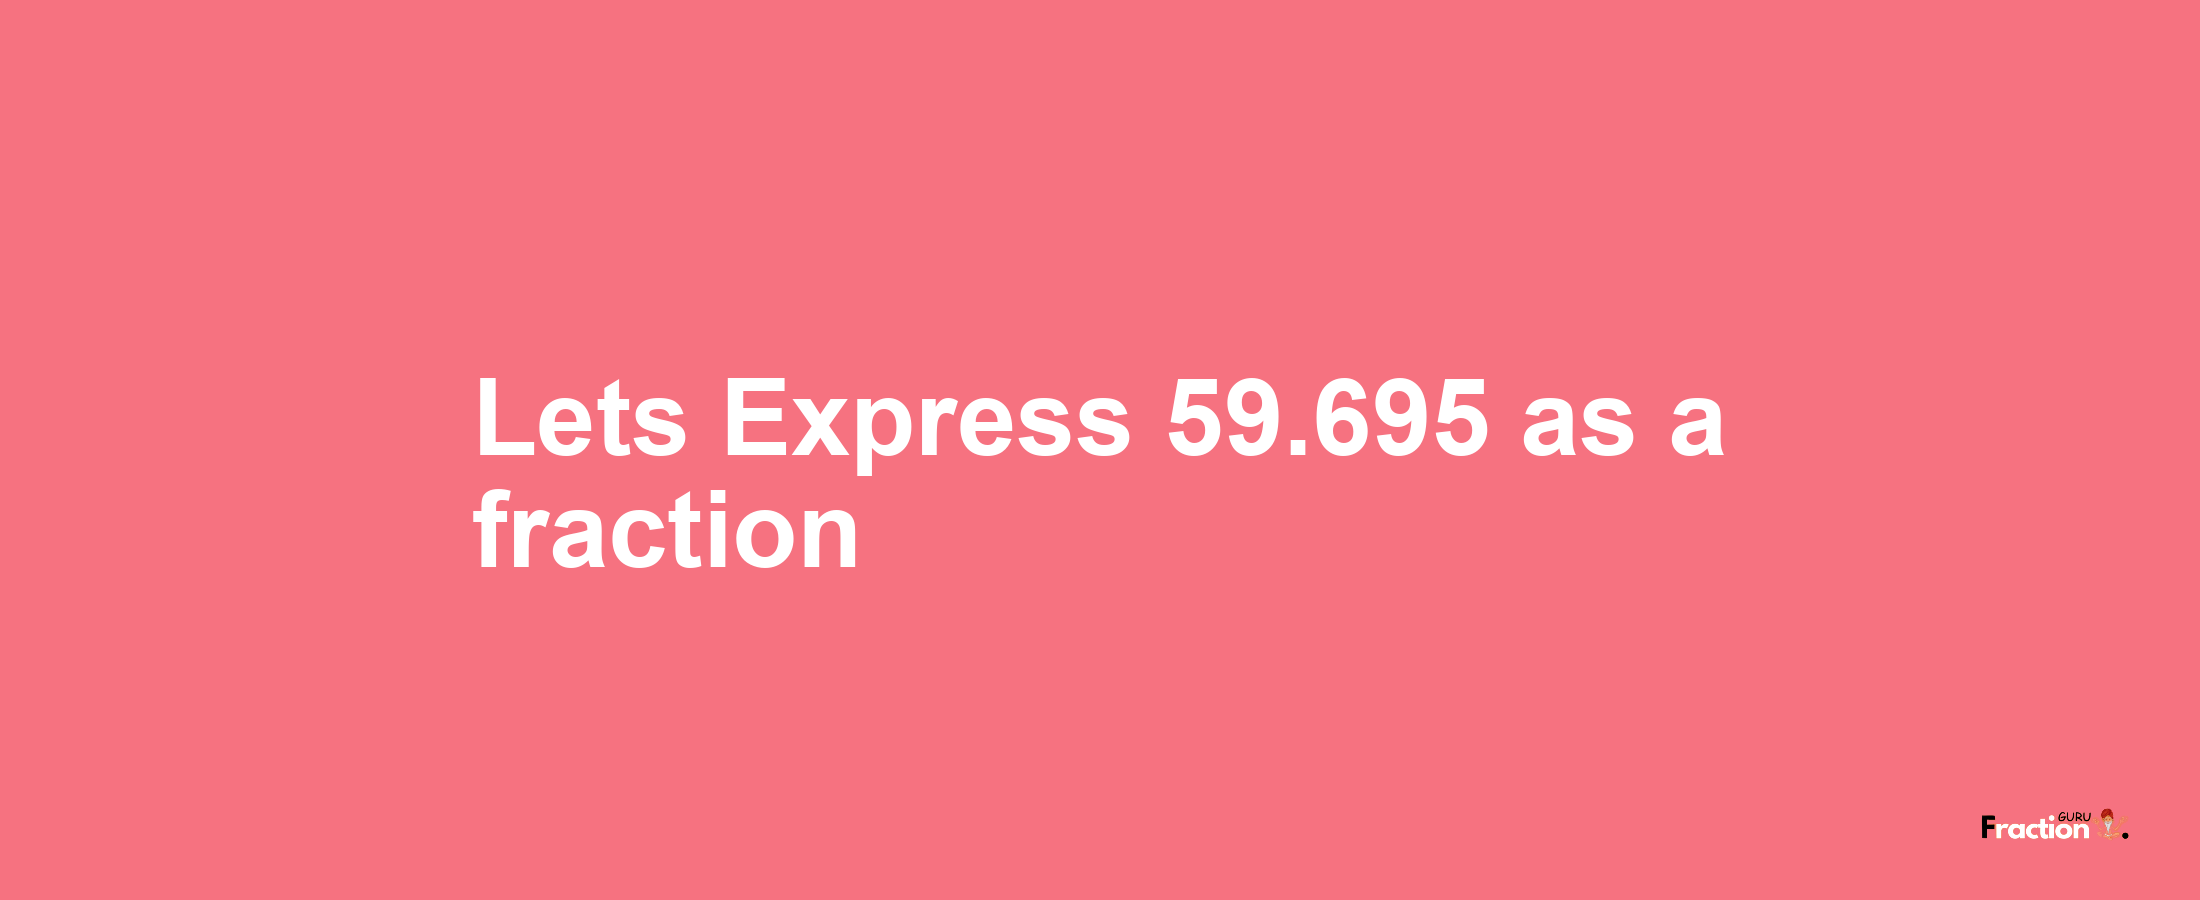 Lets Express 59.695 as afraction